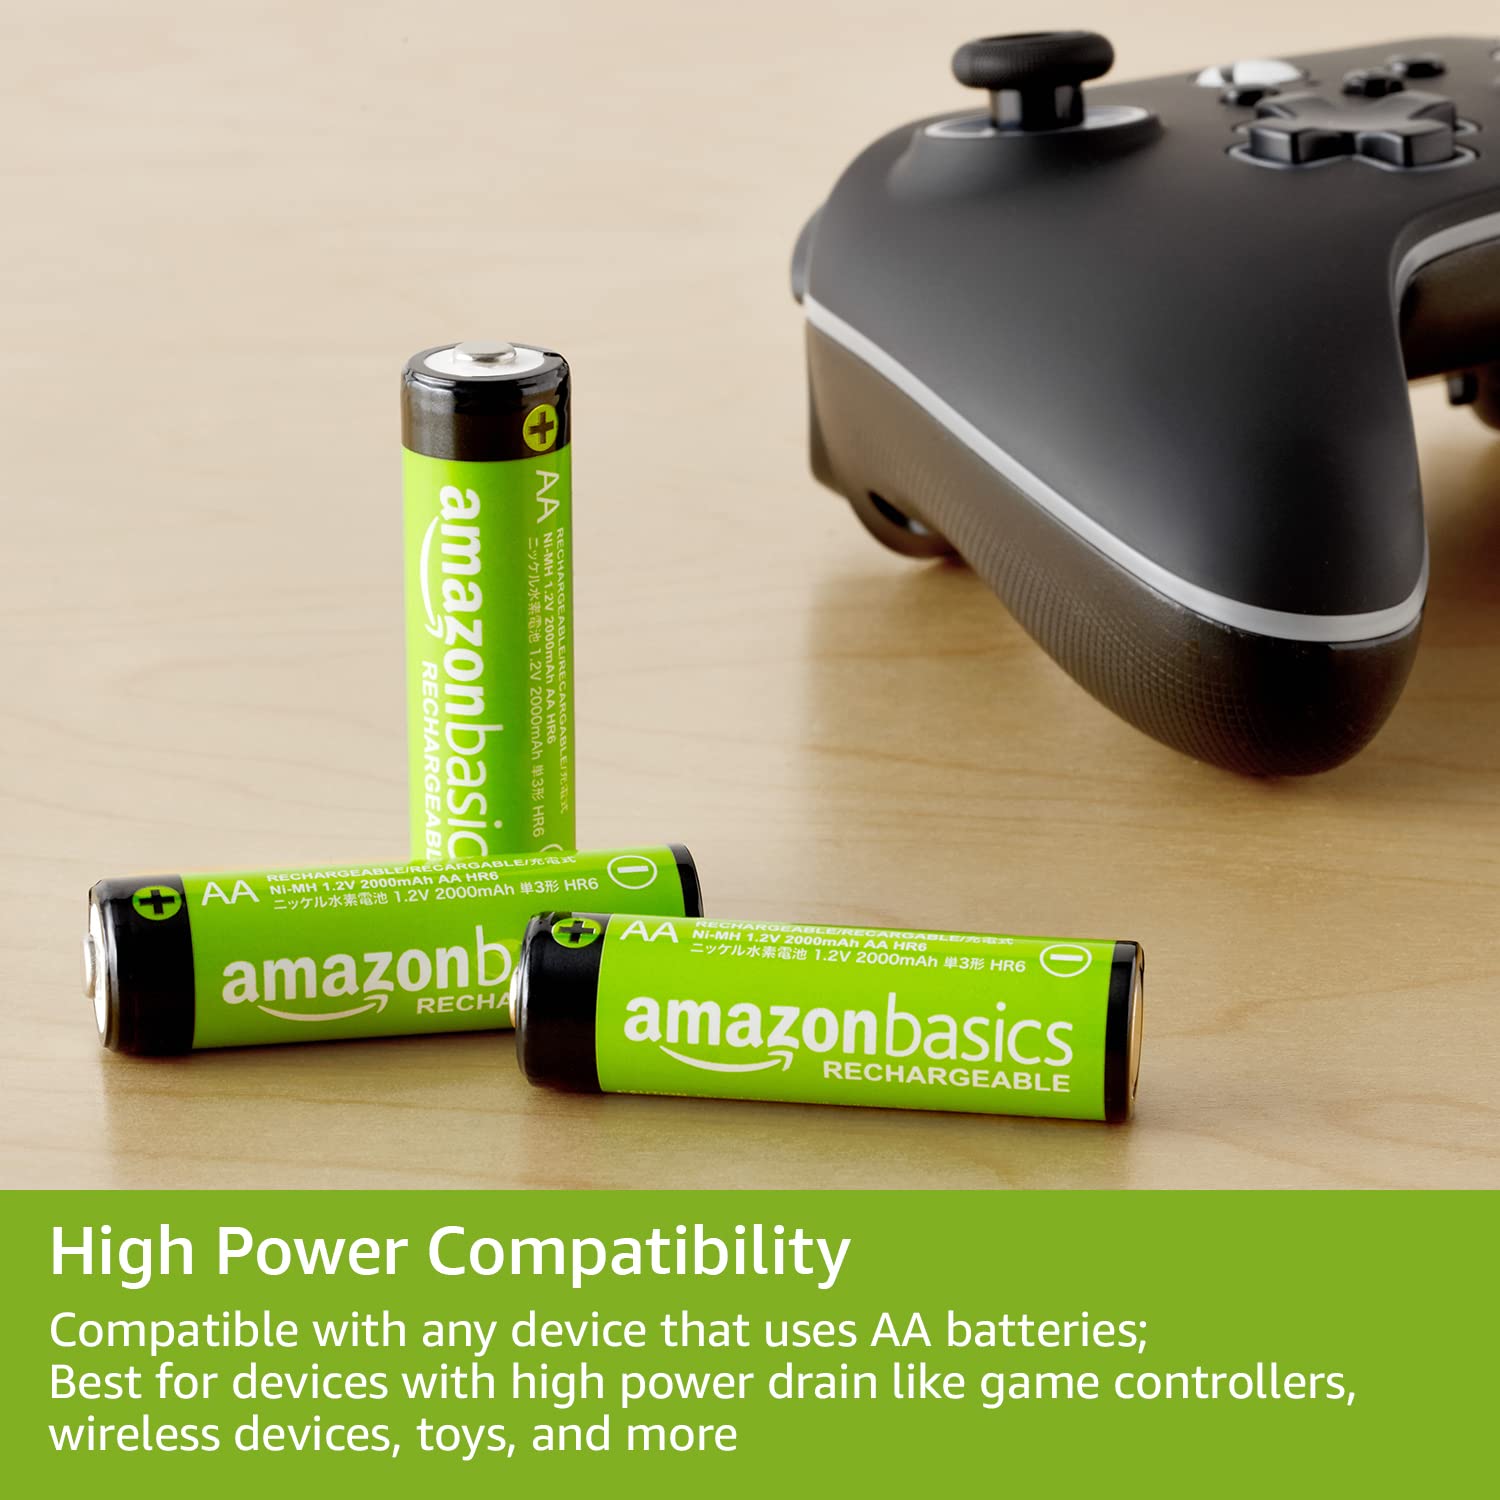 Amazon Basics Rechargeable AA NiMH High-Capacity Batteries, 2400 mAh, Recharge up to 400x, Pre-Charged - Pack of 4